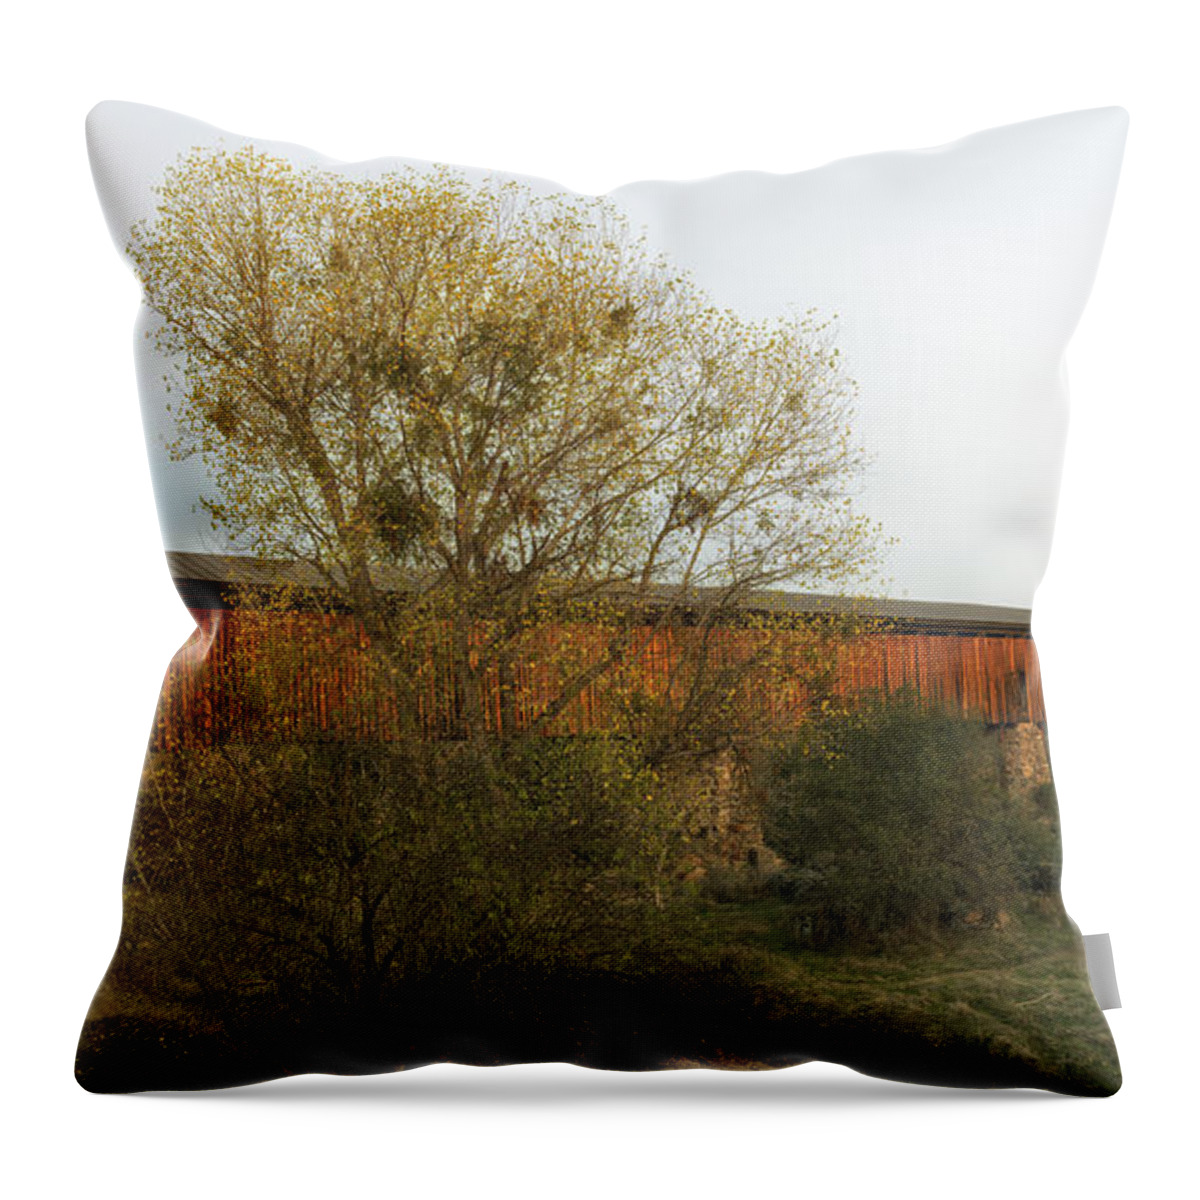 Knights Ferry Bridge Throw Pillow featuring the photograph Knights Ferry Wooden Bridge - California by Mountain Dreams